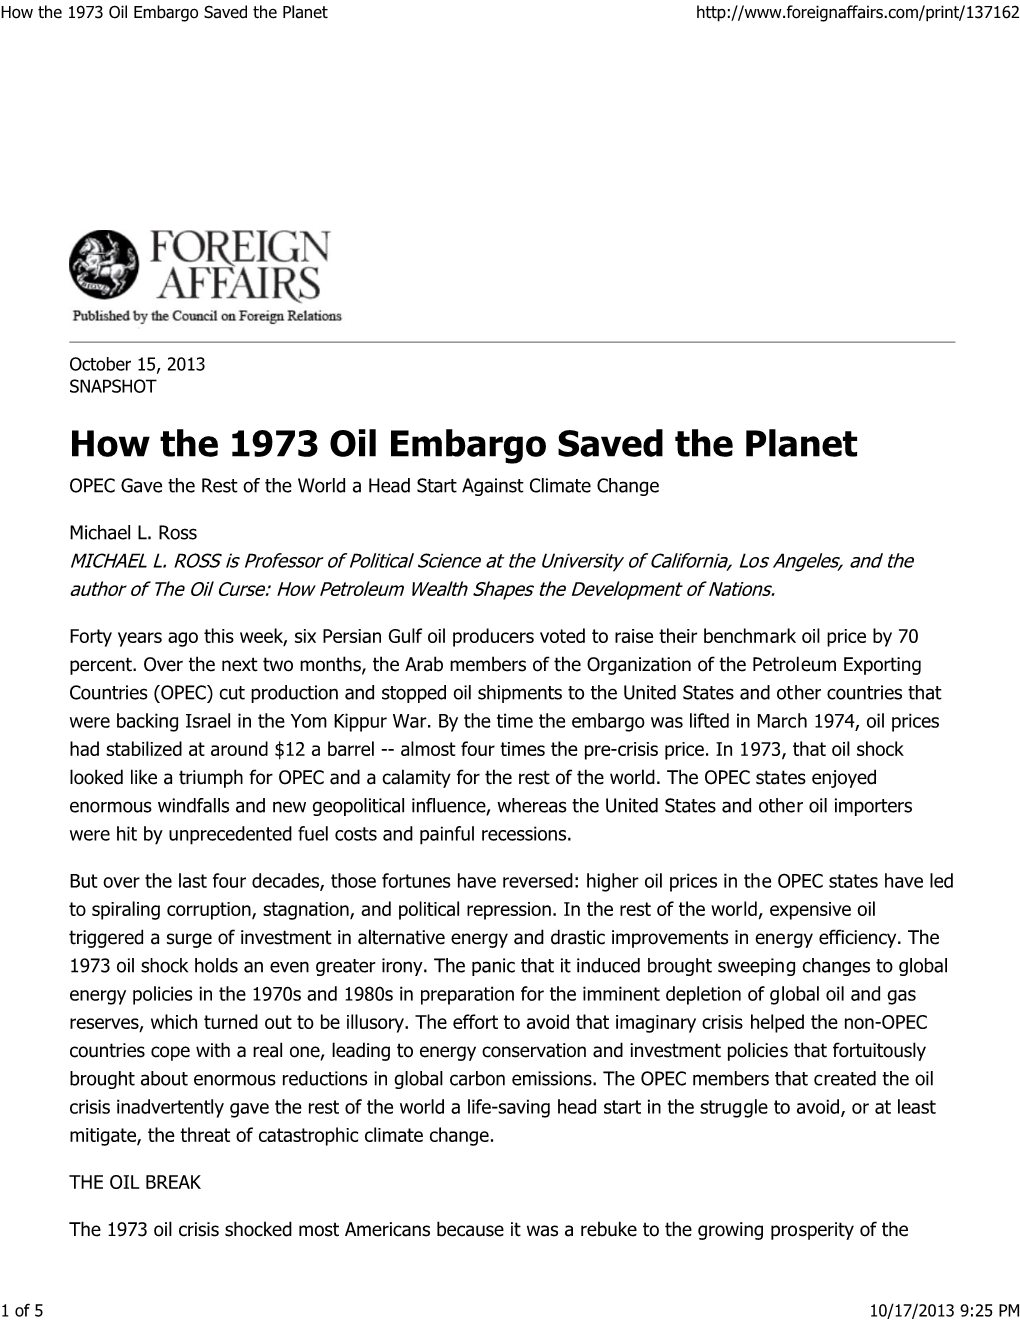 How the 1973 Oil Embargo Saved the Planet